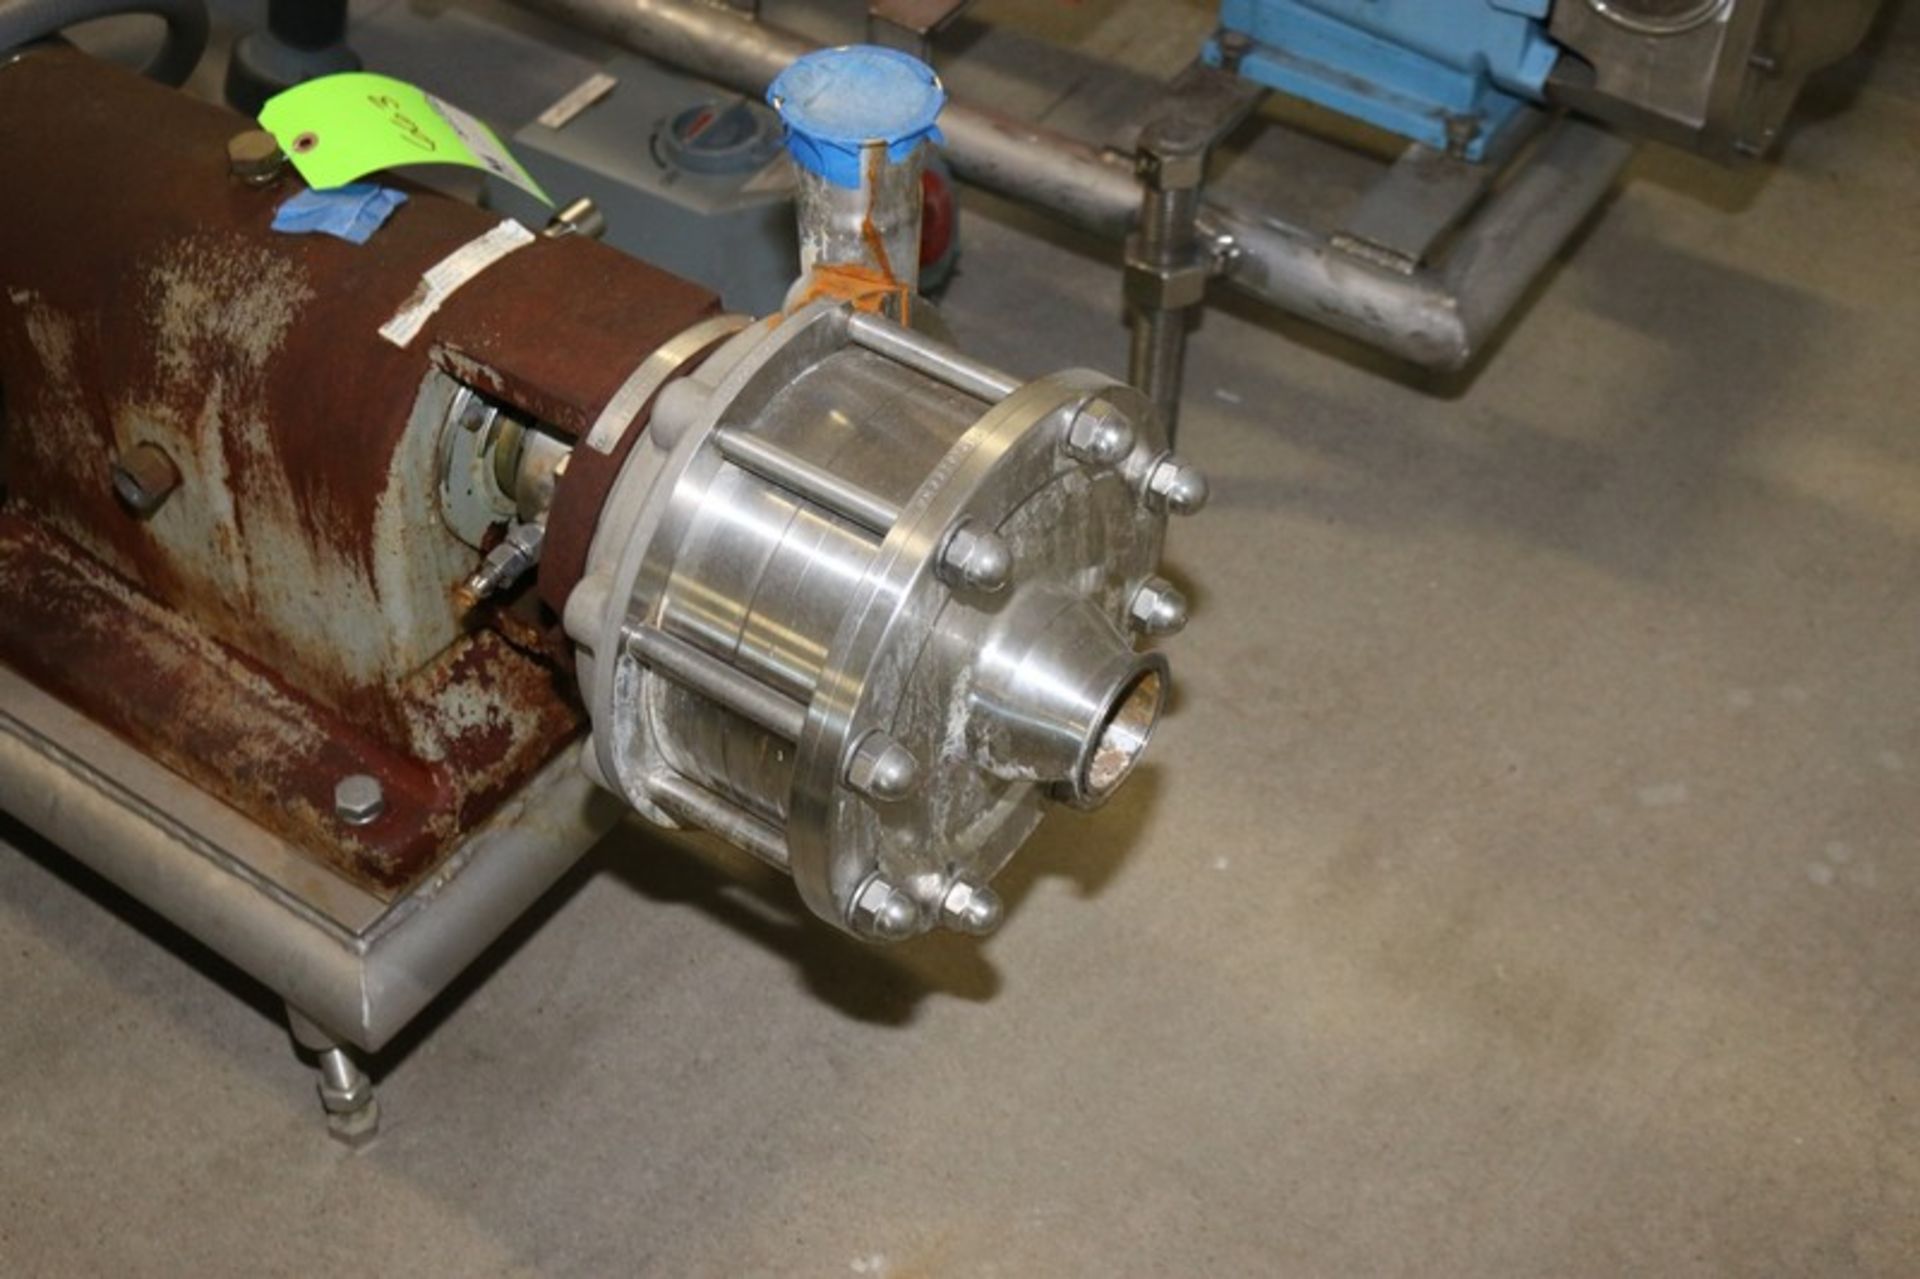 Fristam 40 hp Centrifugal Pump, M/N FM332-175, S/N FM33297319, with Reliance 3560 RPM Motor, with - Image 2 of 5